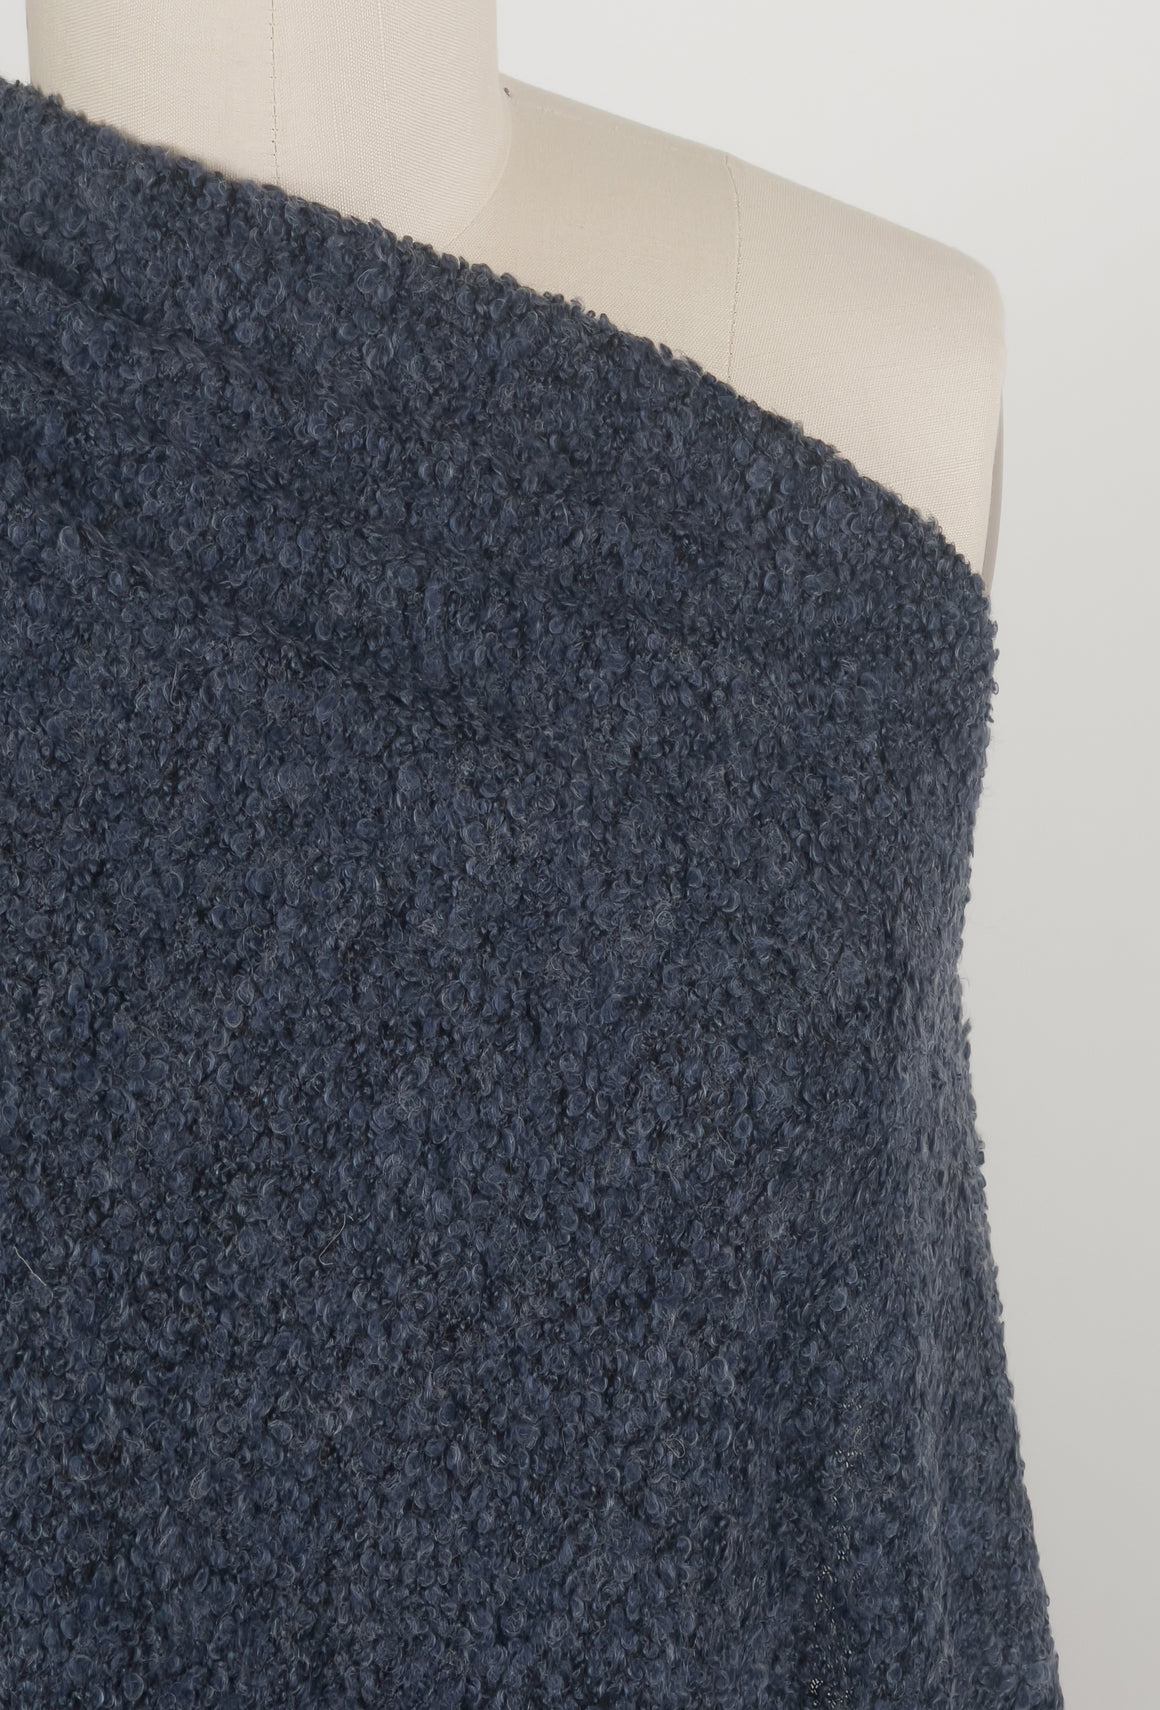 Poly/Wool Blend Sweater Knit - Curly Cue - Navy